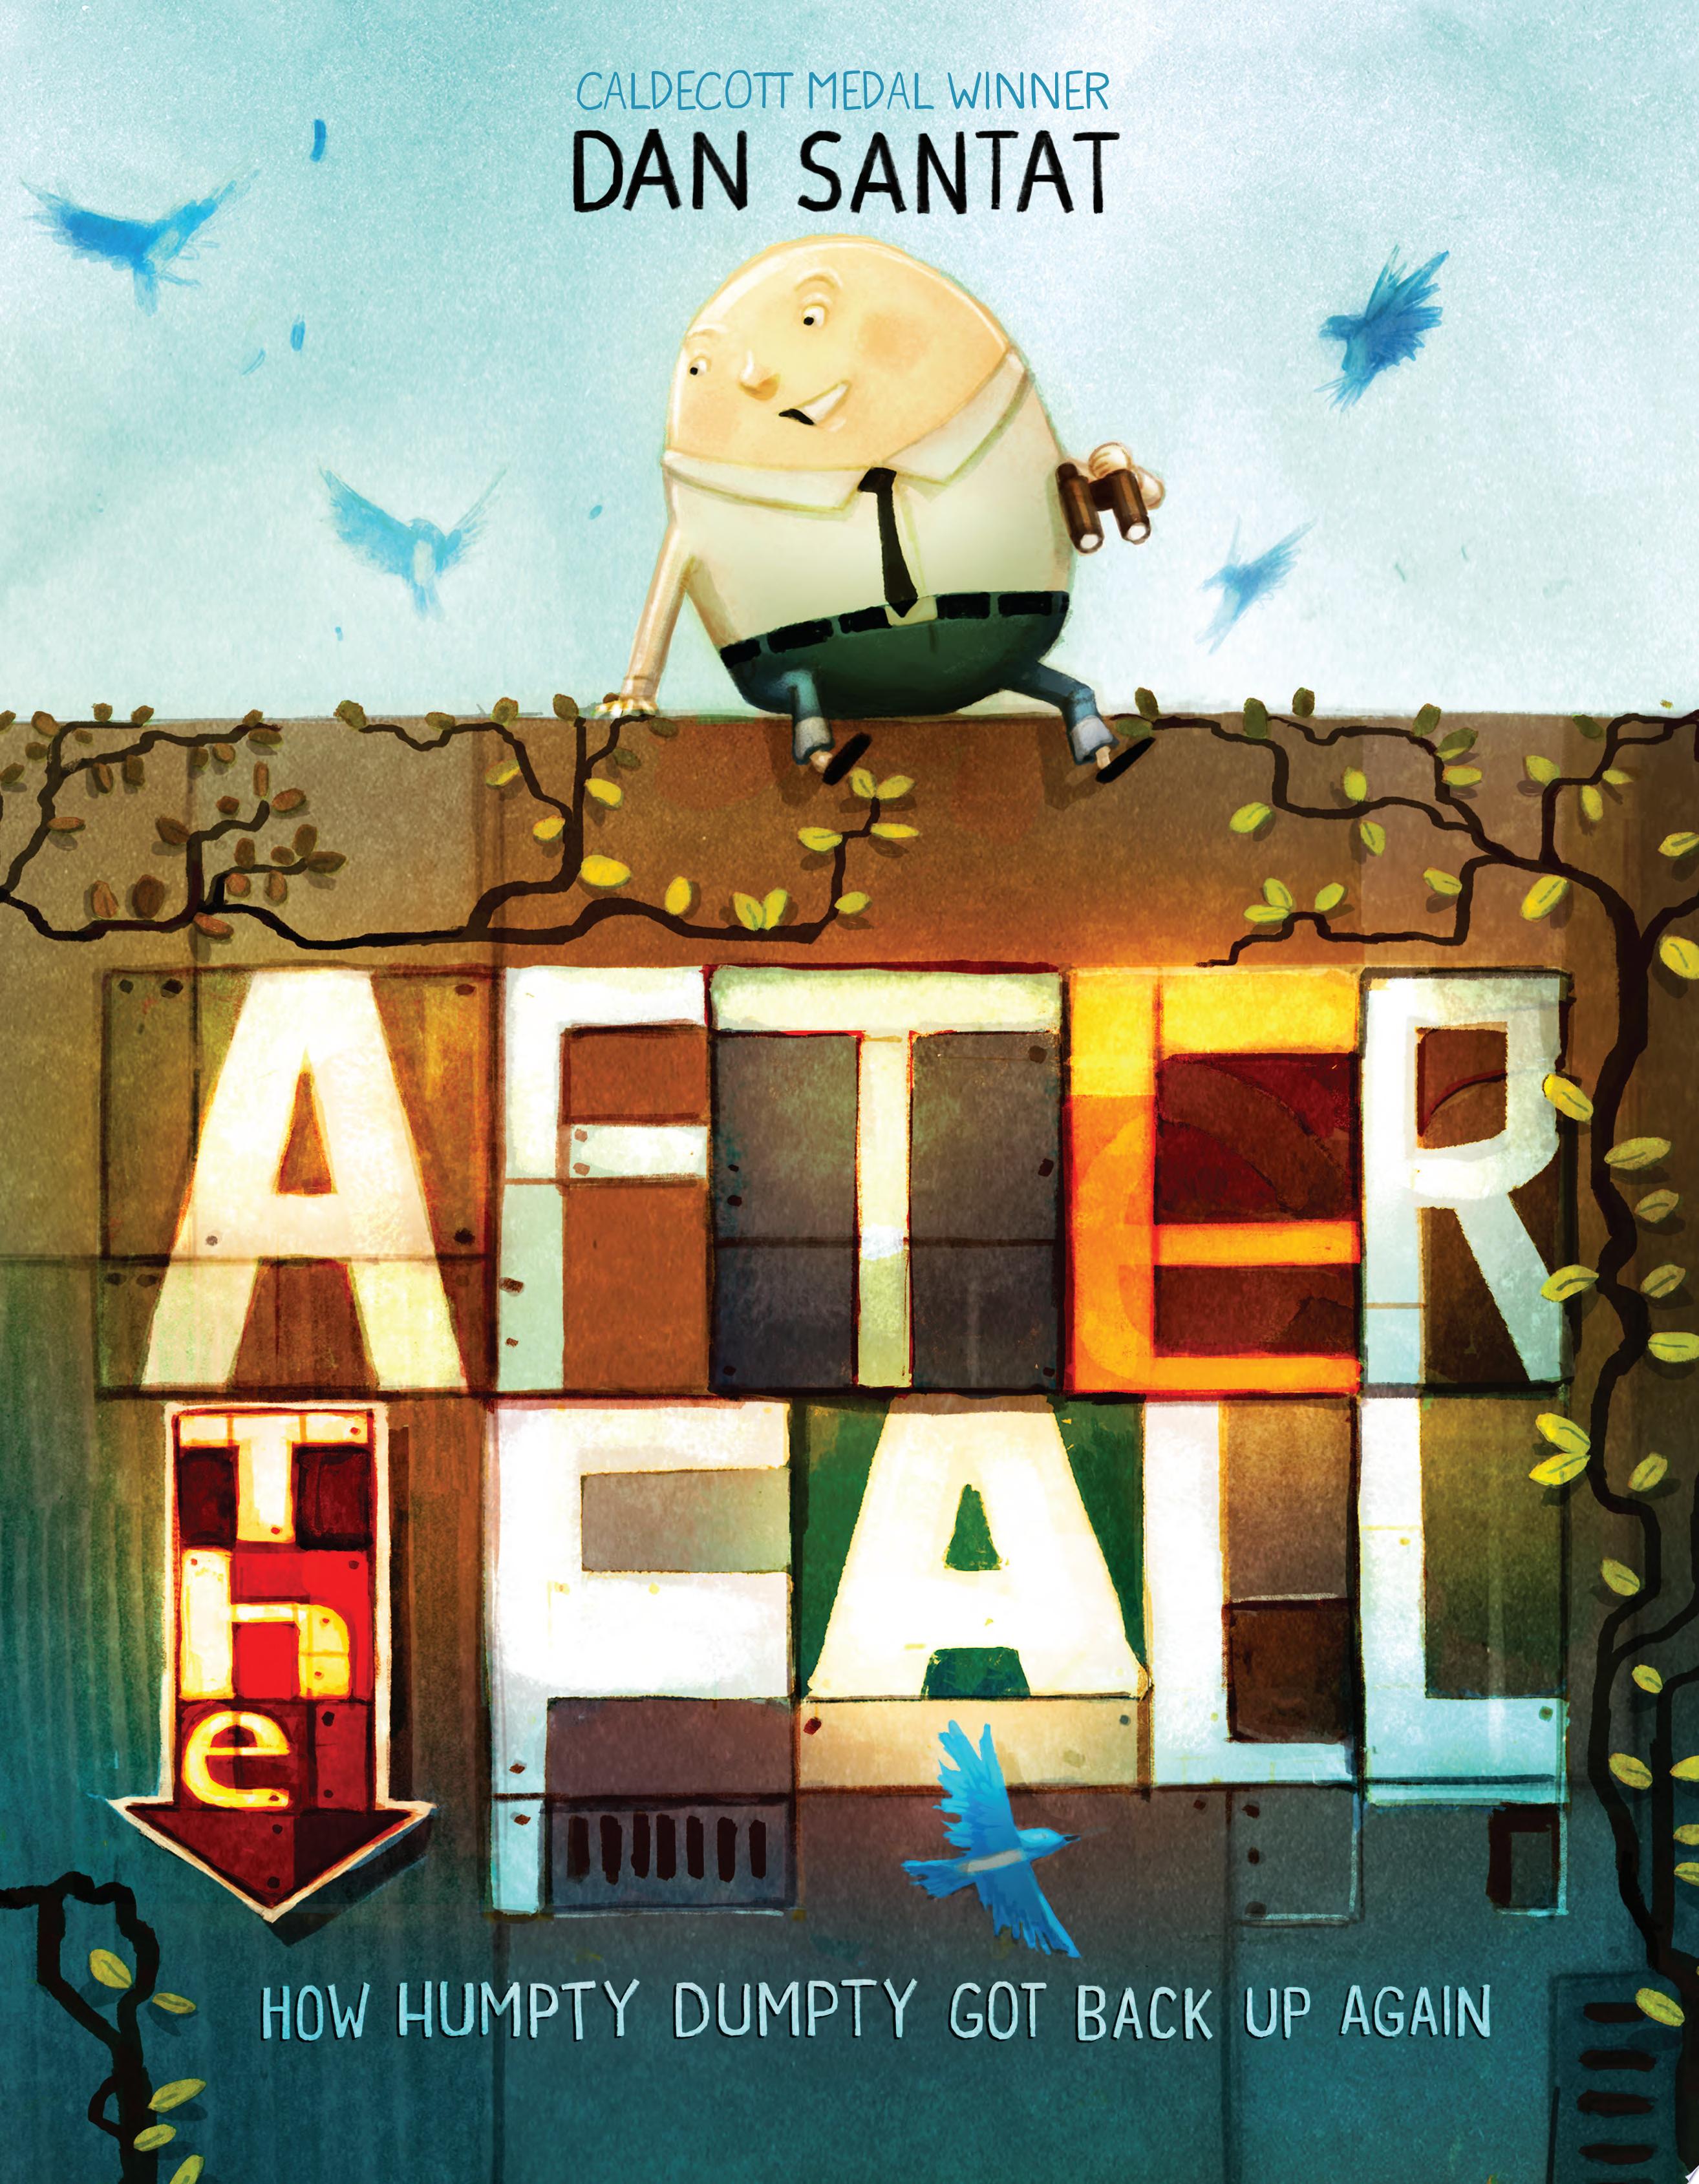 Image for "After the Fall (How Humpty Dumpty Got Back Up Again)"